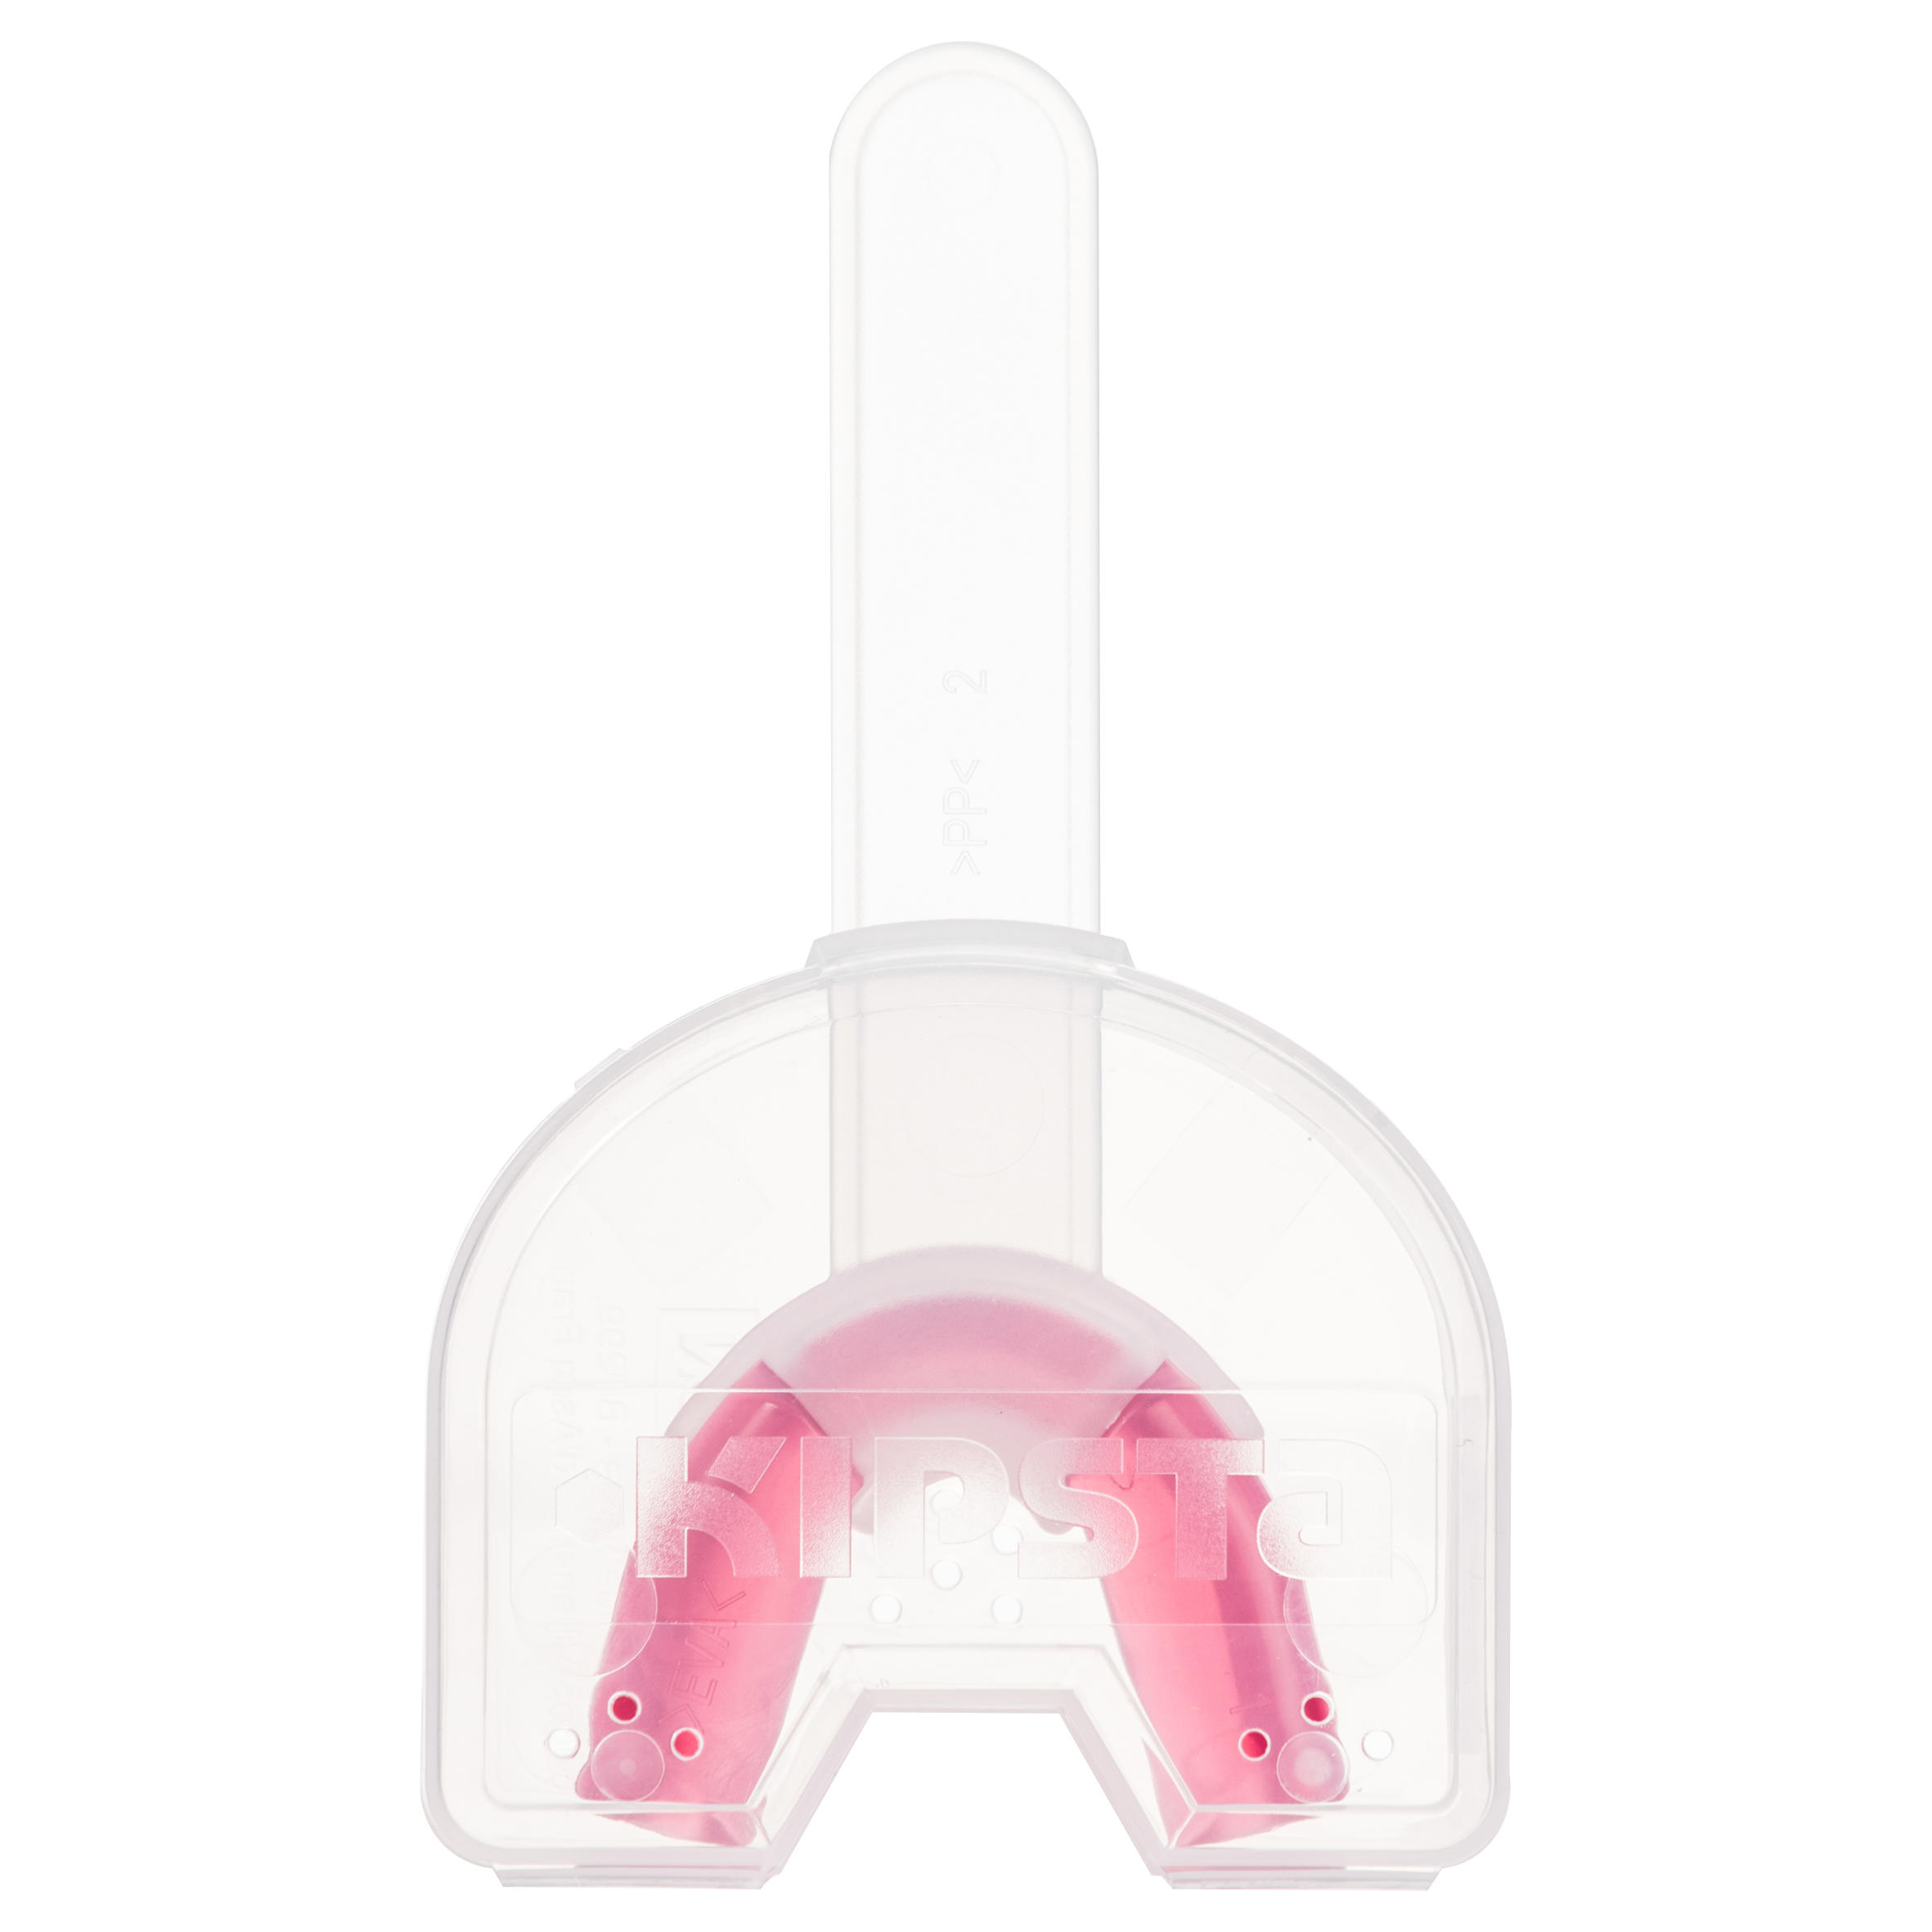 Kids' Low Intensity Field Hockey Mouthguard Size Small FH100 - Pink 8/11